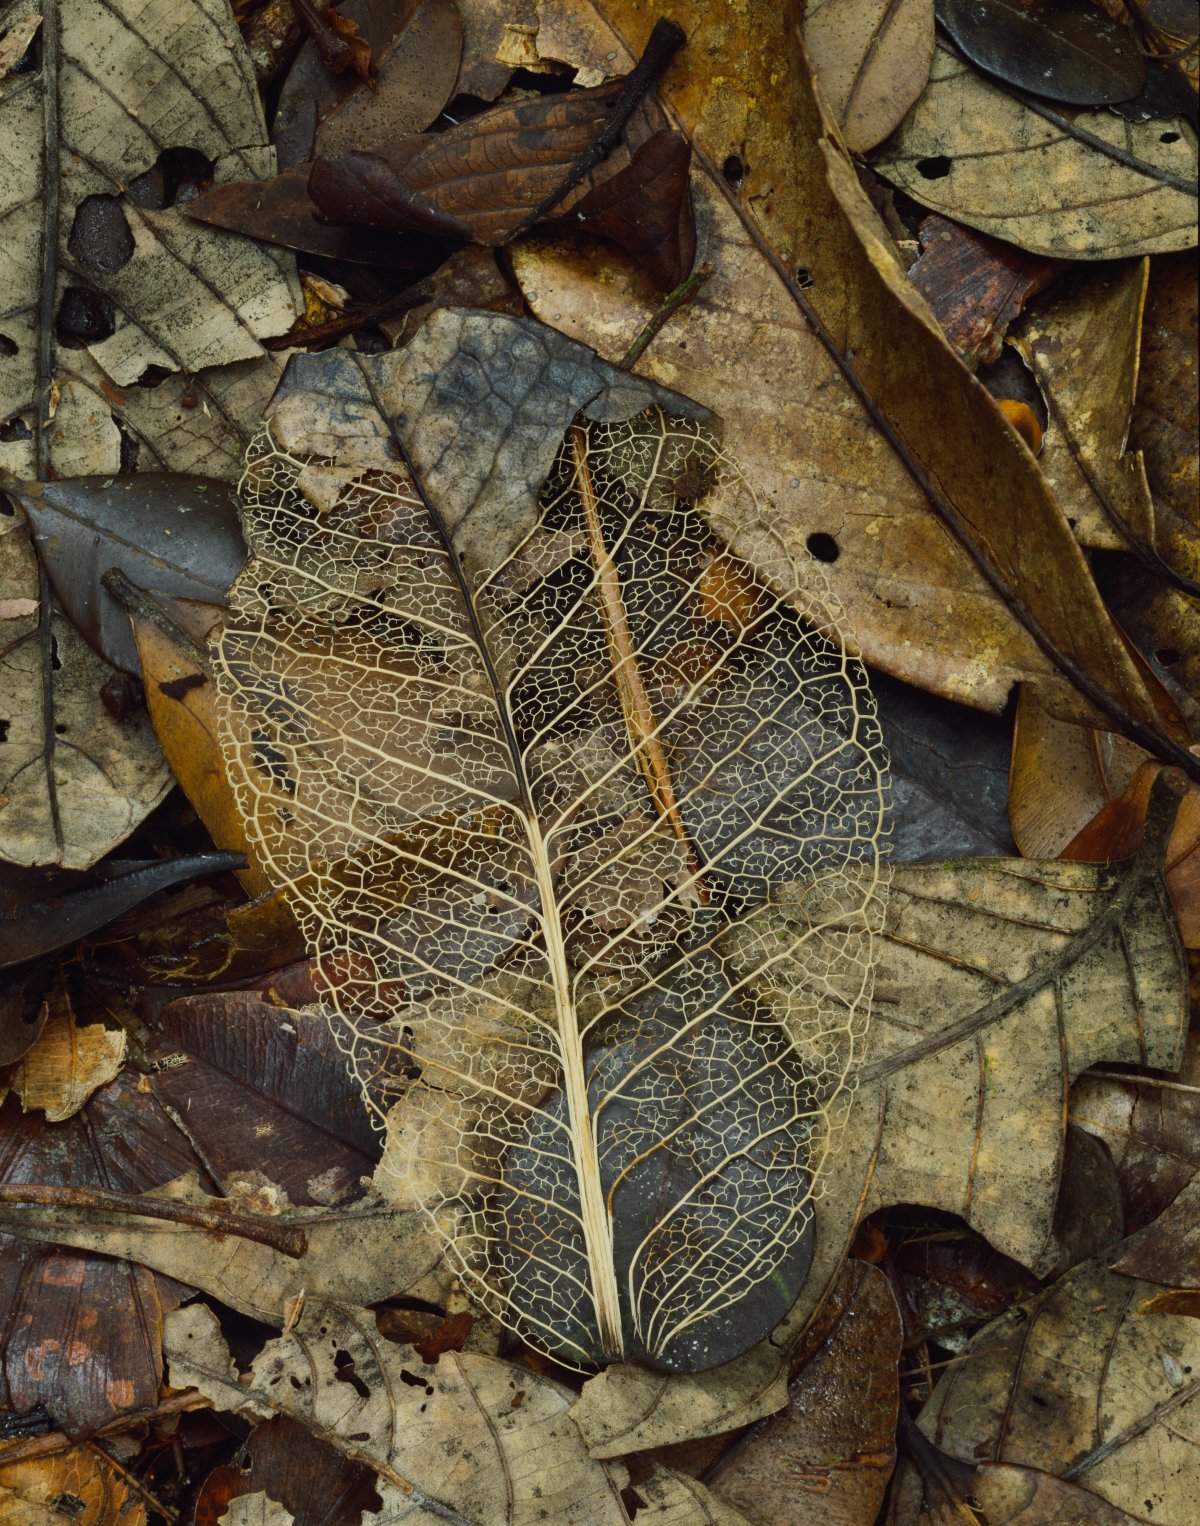 The skeleton of a leaf sits on a bed of other dead dried leaves. The leaf skeleton has retained the woody veins of the leaf while the fleshy parts have decayed.